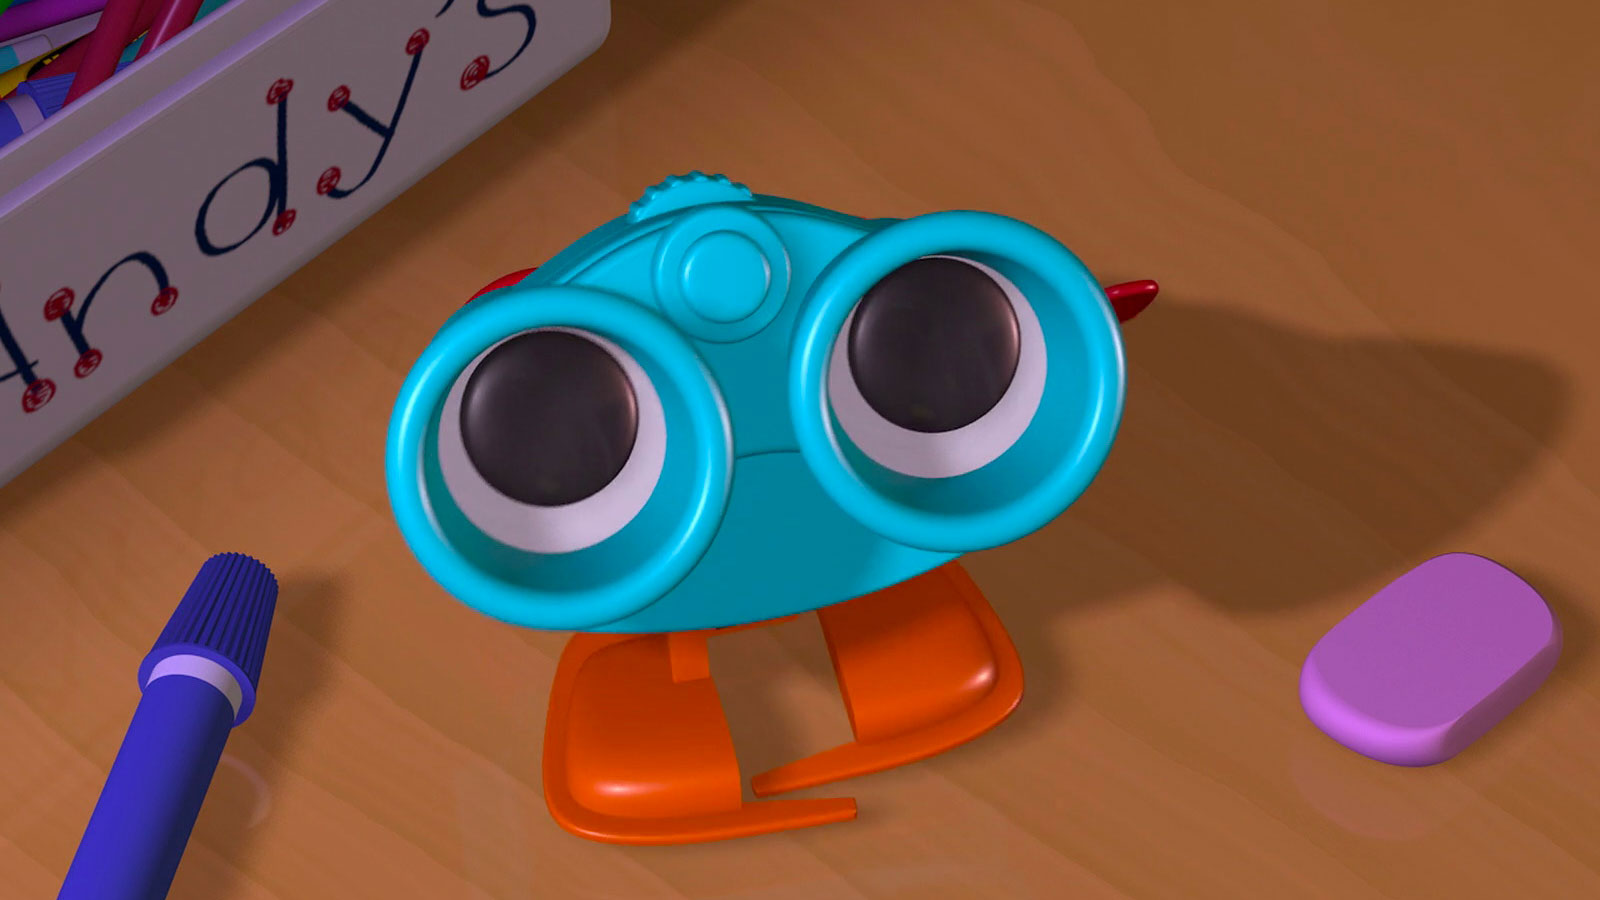 Do You Know the Names of These Toys from Toy Story? Quiz 1210